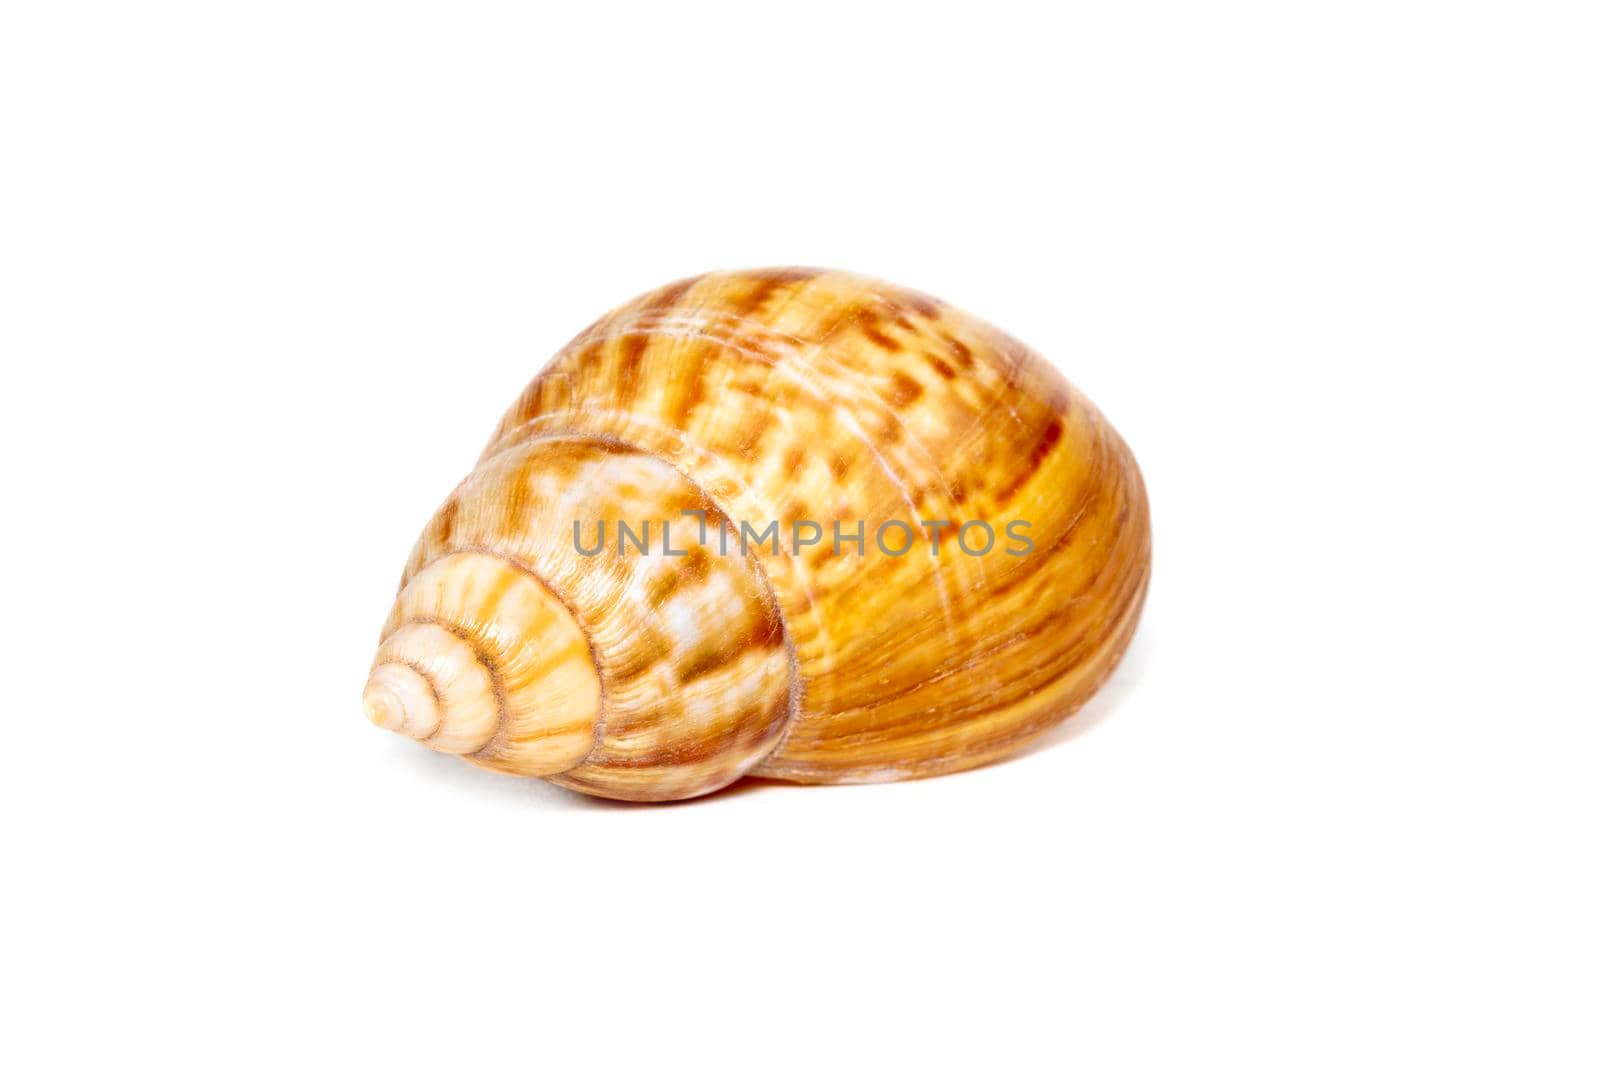 Image of brown pattern conch shell on a white background. Undersea Animals. Sea shells.